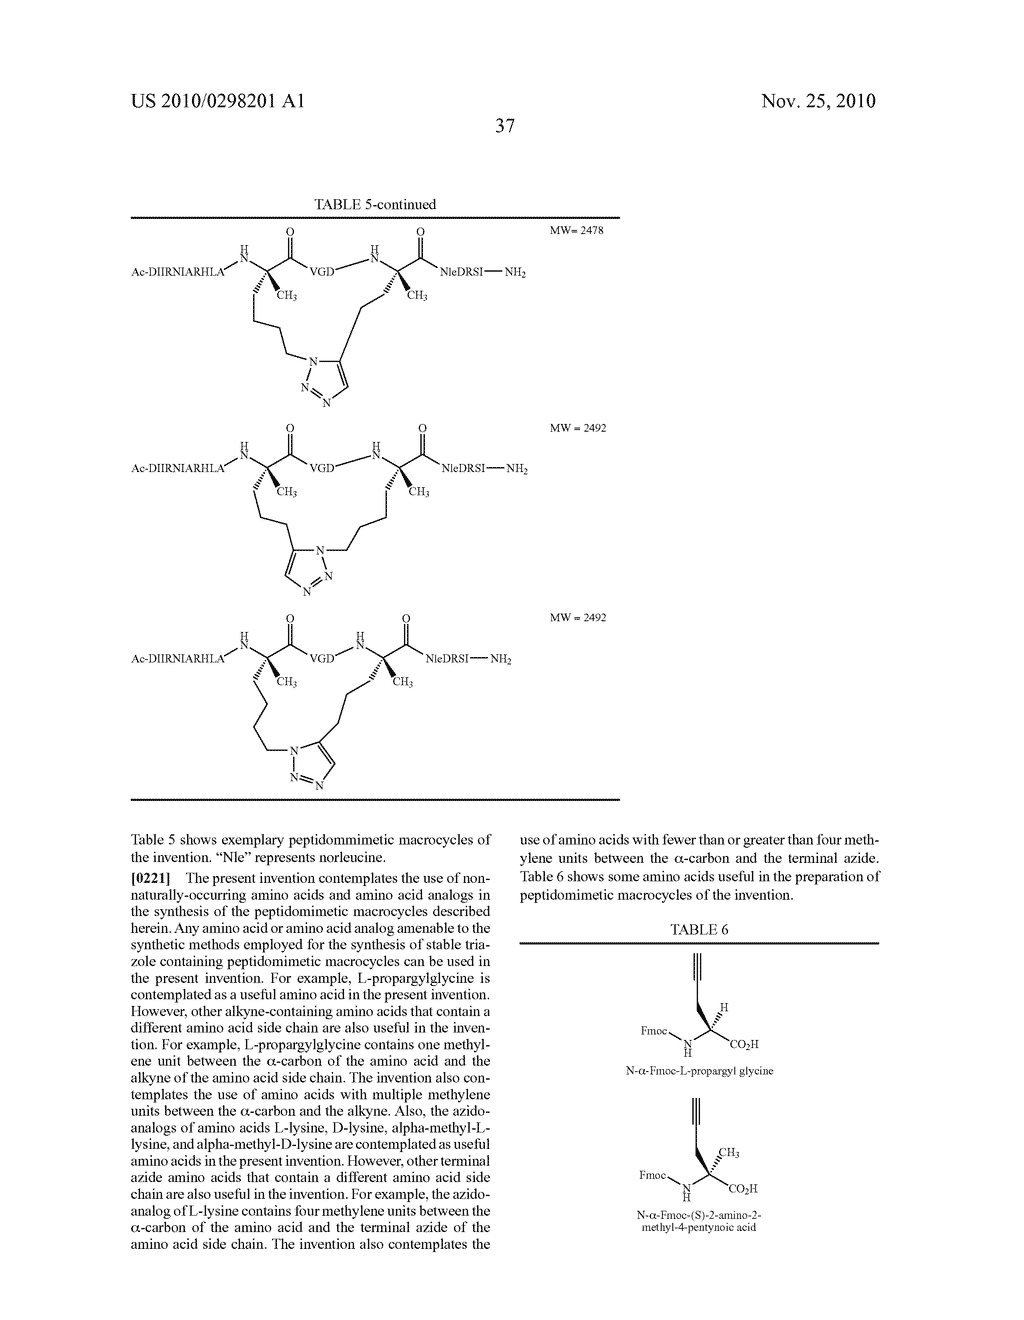 PEPTIDOMIMETIC MACROCYCLES WITH IMPROVED PROPERTIES - diagram, schematic, and image 65